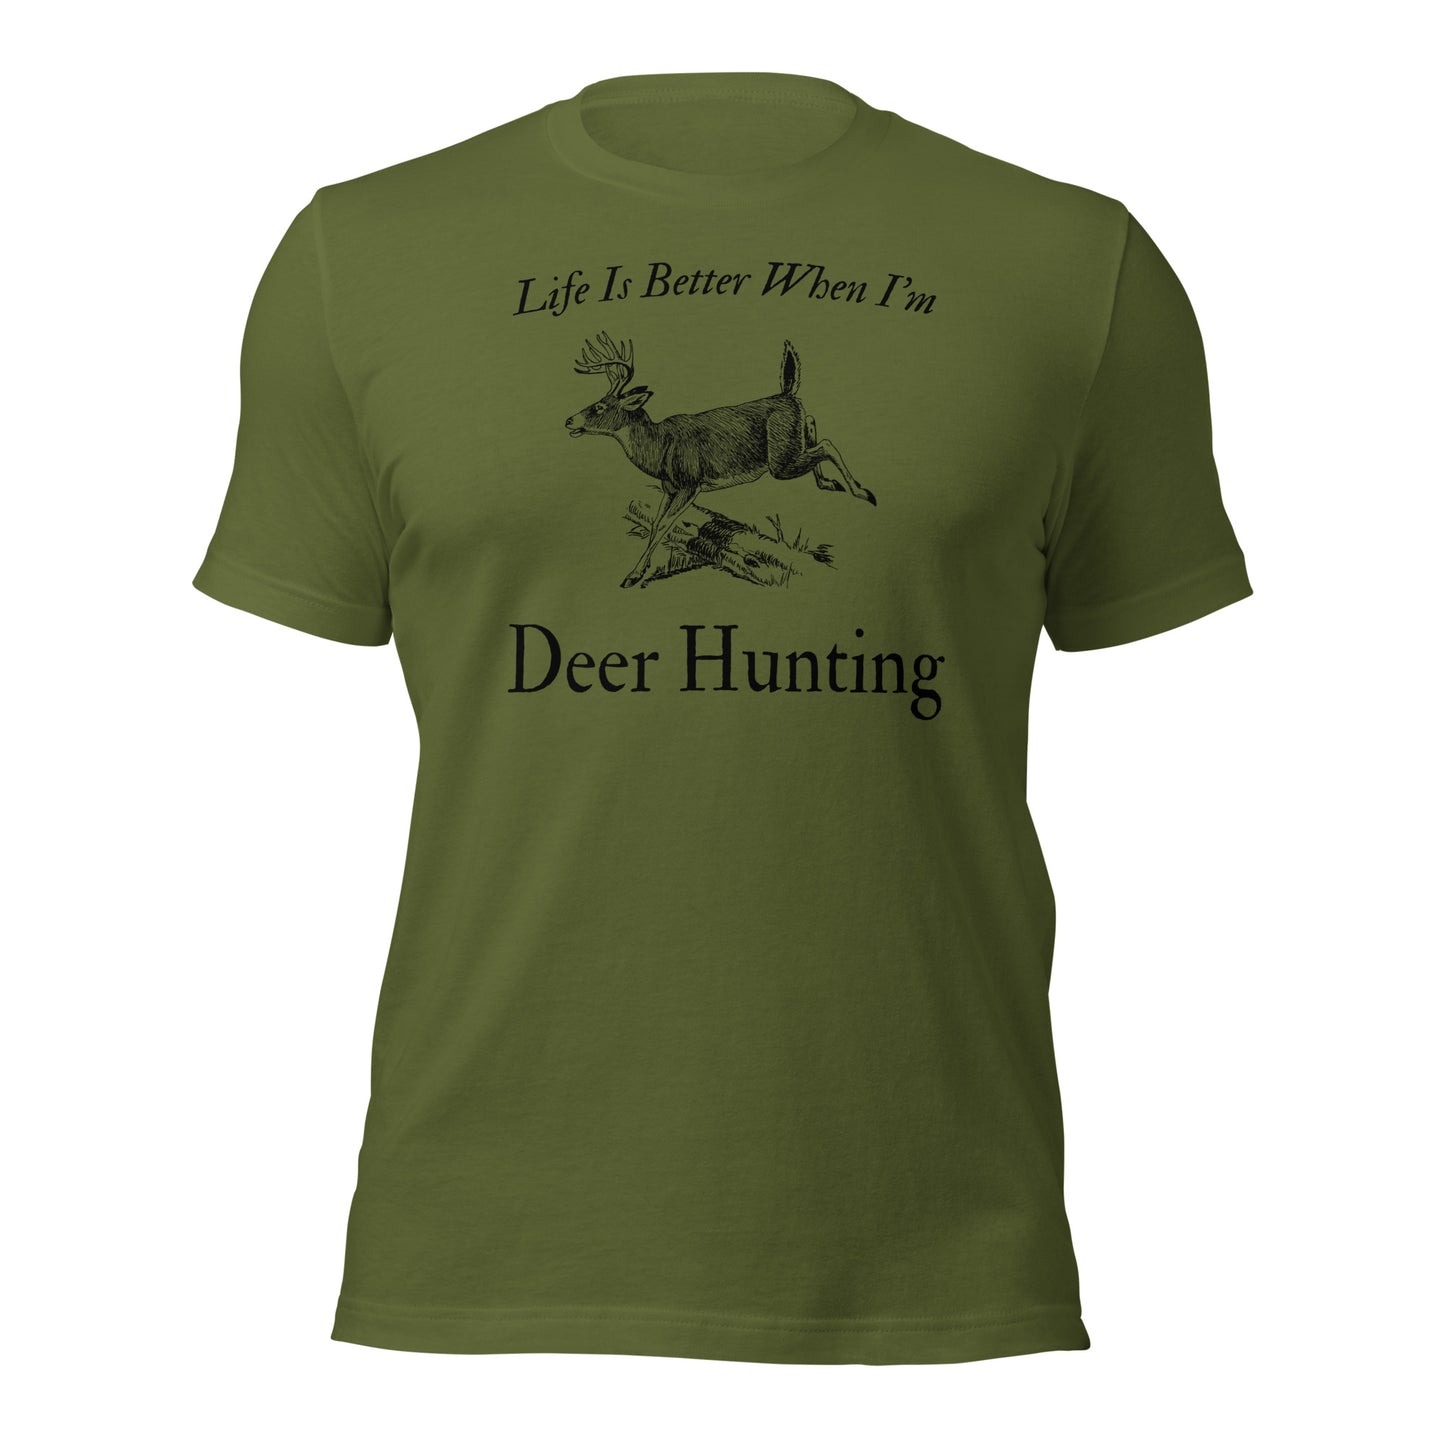 Deer hunting passion t-shirt with deer silhouette and rifle design